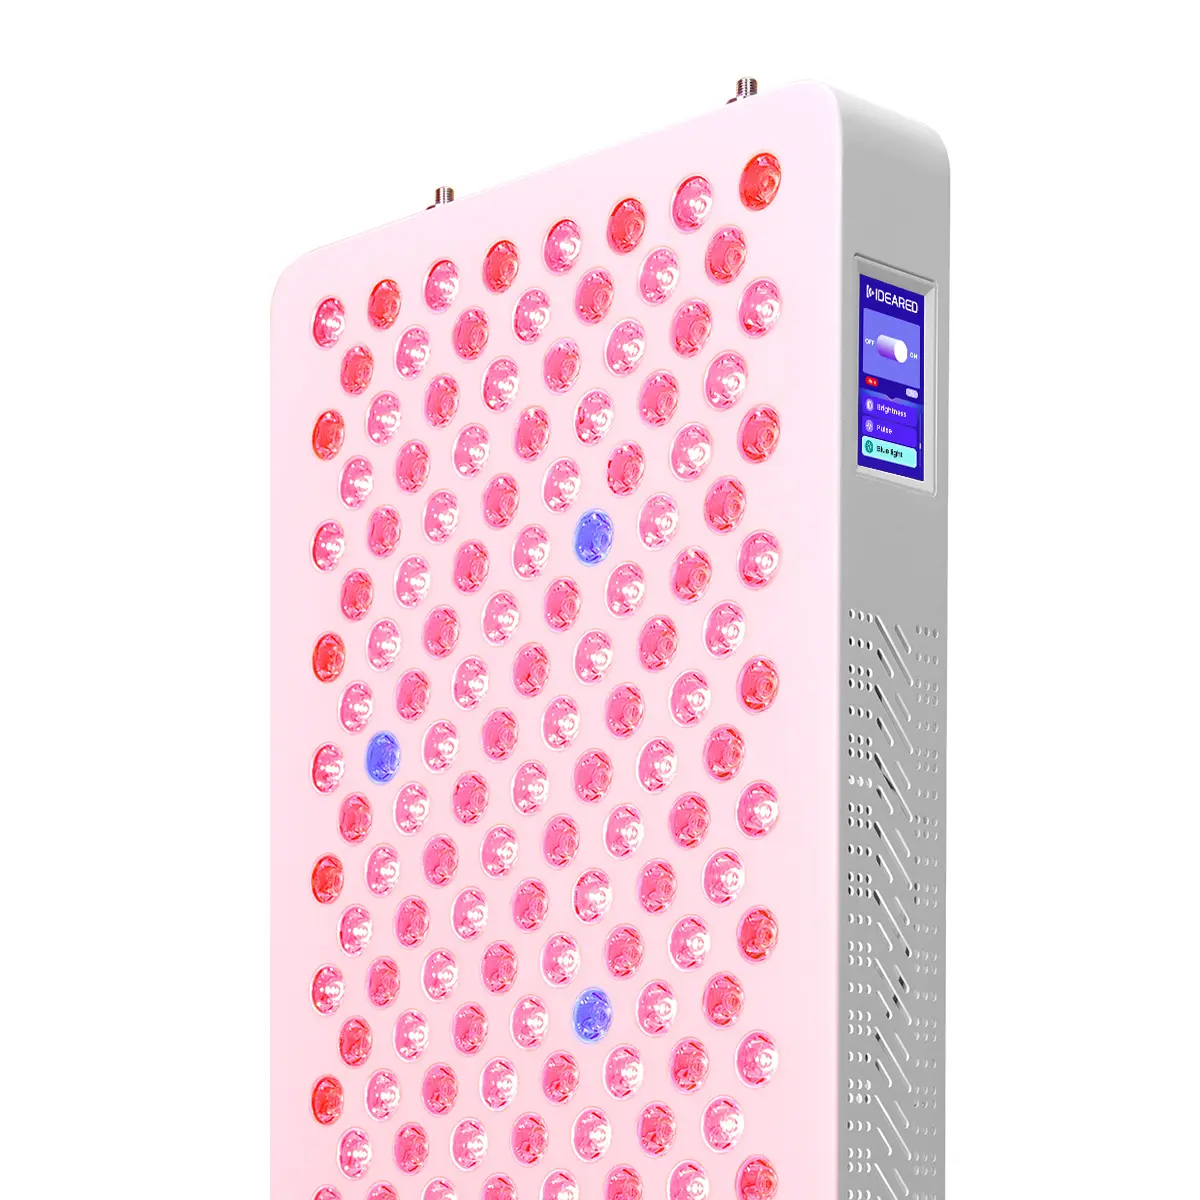 IDEALIGHT High Irradiance Whole Body Treatment RLT Beauty Device Panel 660nm 850nm Red Infrared Therapy Light